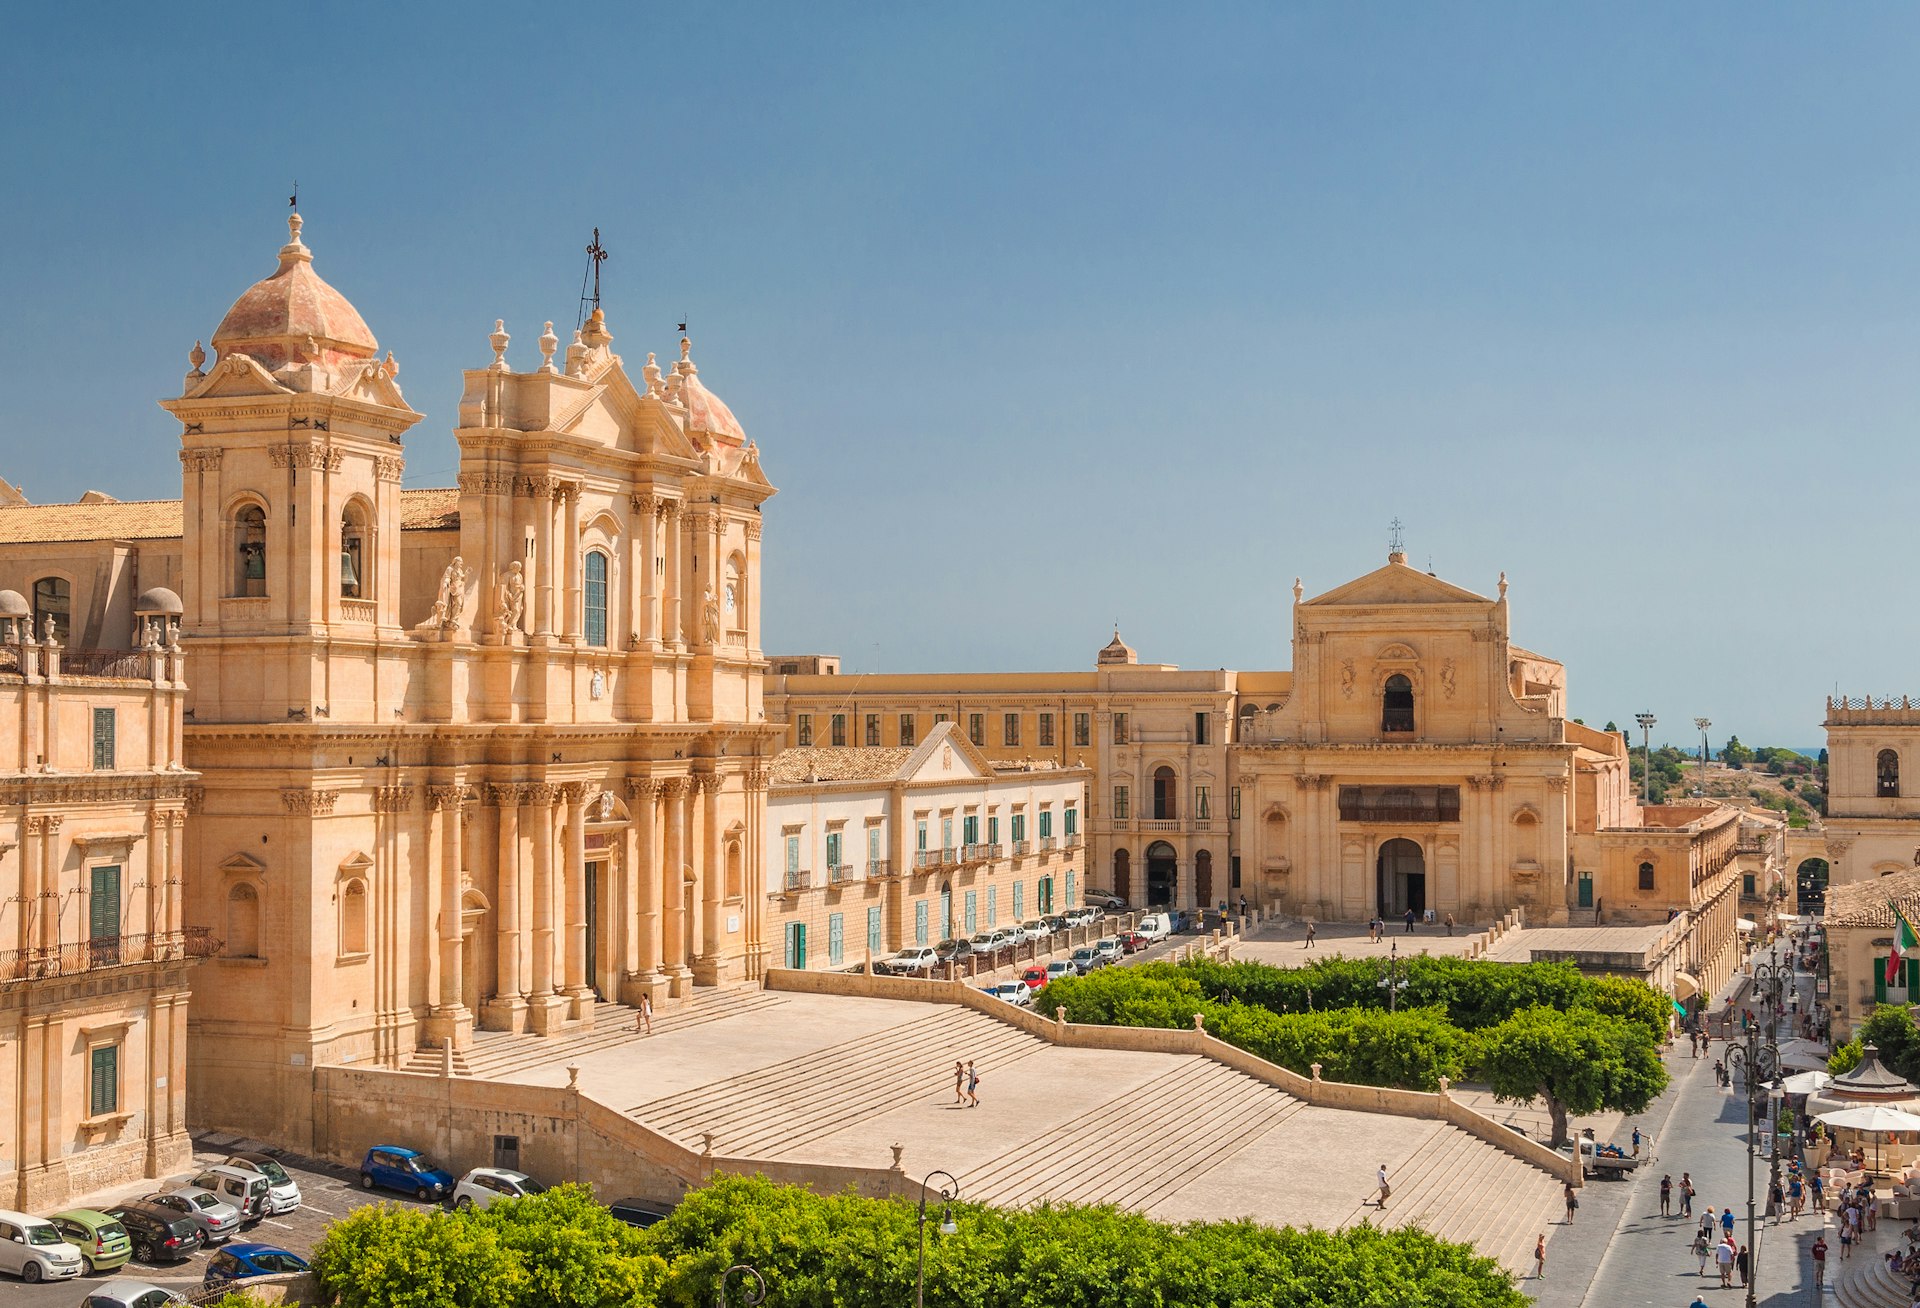 An aerial view of Noto Cathedral in the town of Noto, Sicily. The cathedral is grand, built from white limestone, and has a large flight of stairs leading up to it.